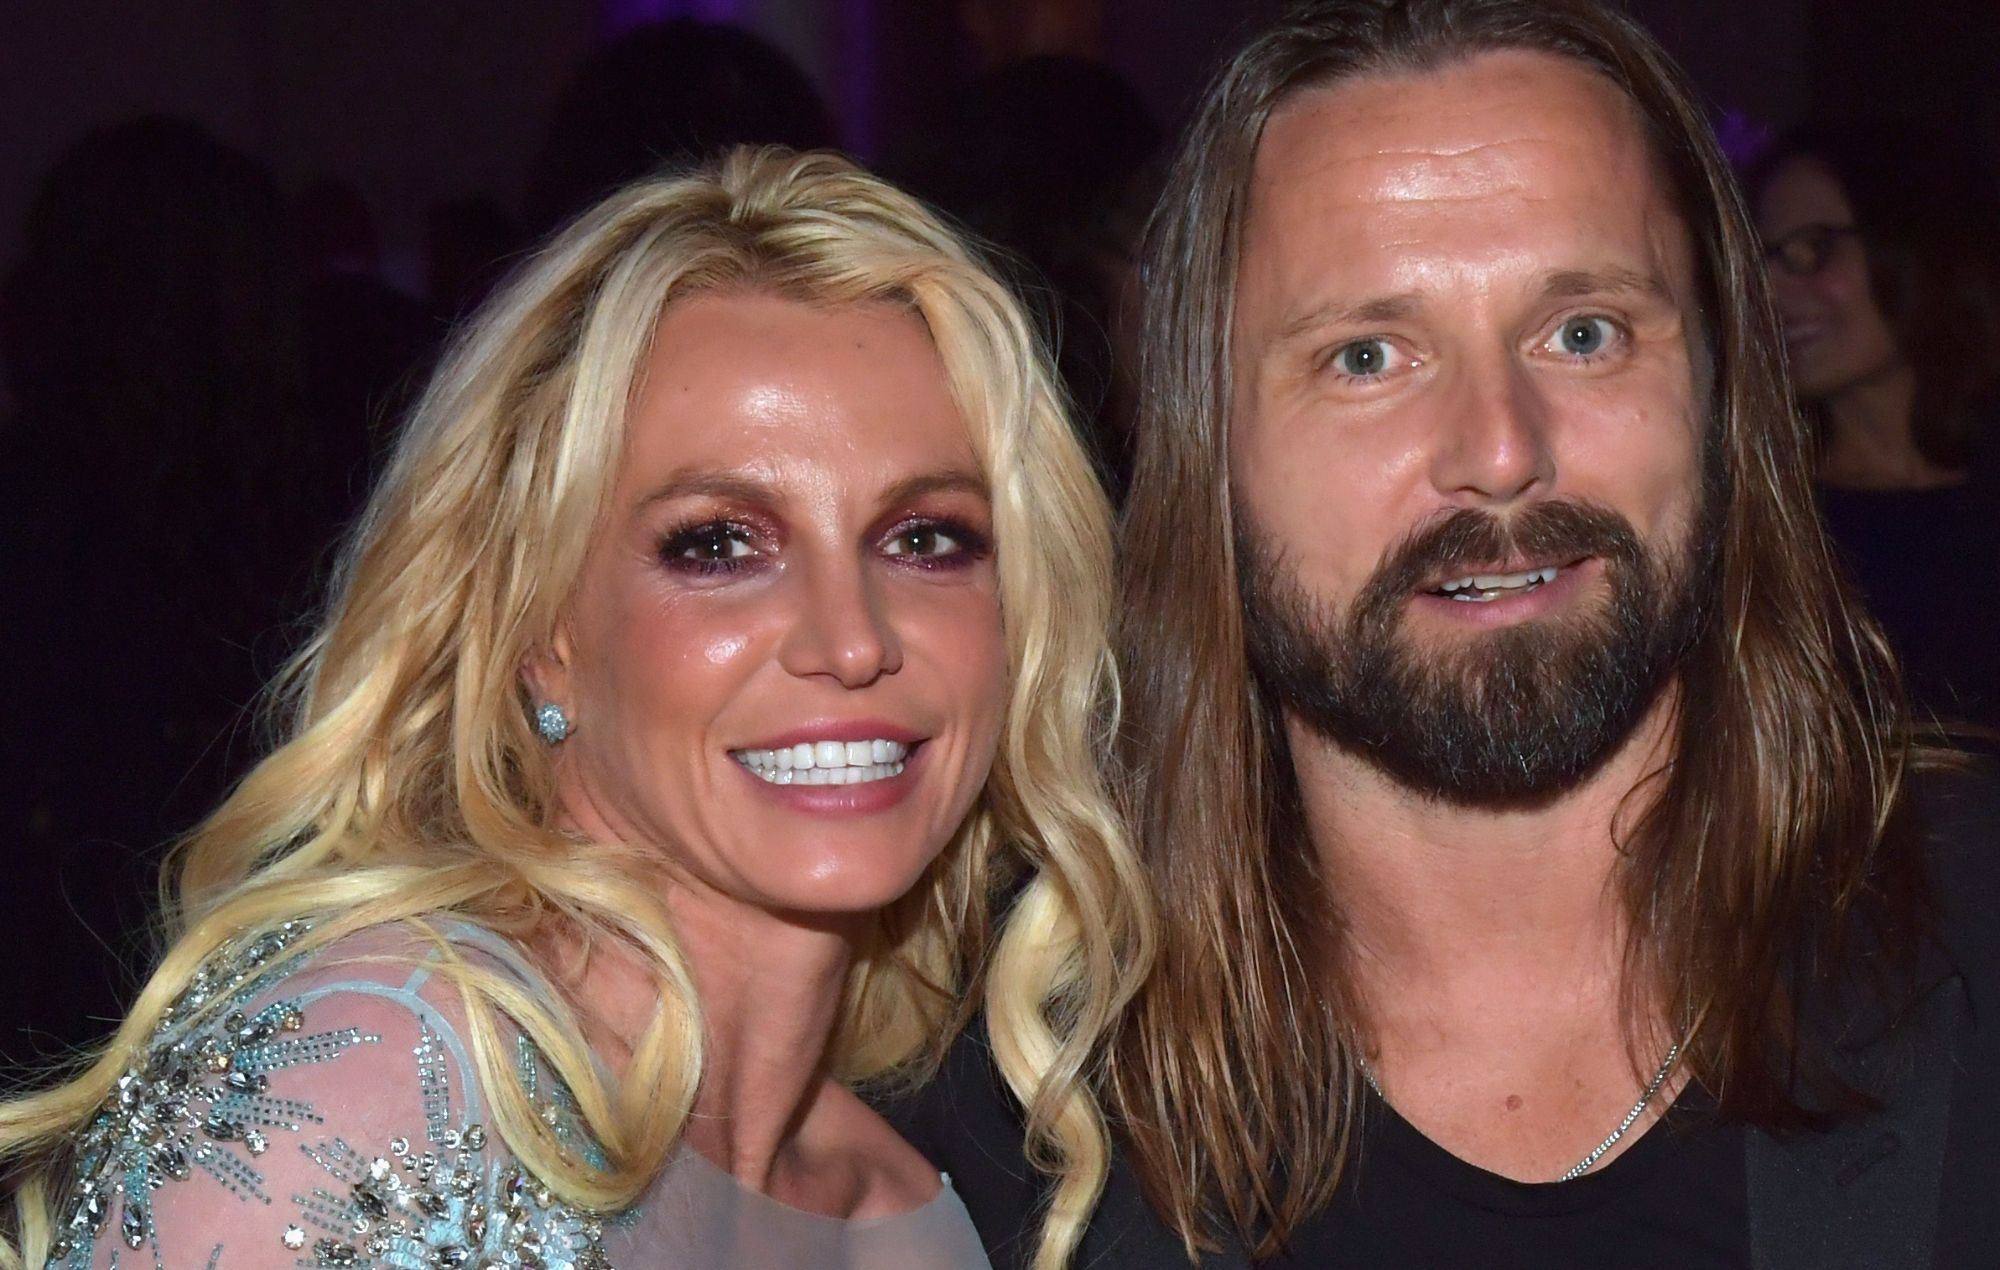 Max Martin celebrates 25 years of Britney Spears’ ‘…Baby One More Time’: “It changed the landscape of pop music”